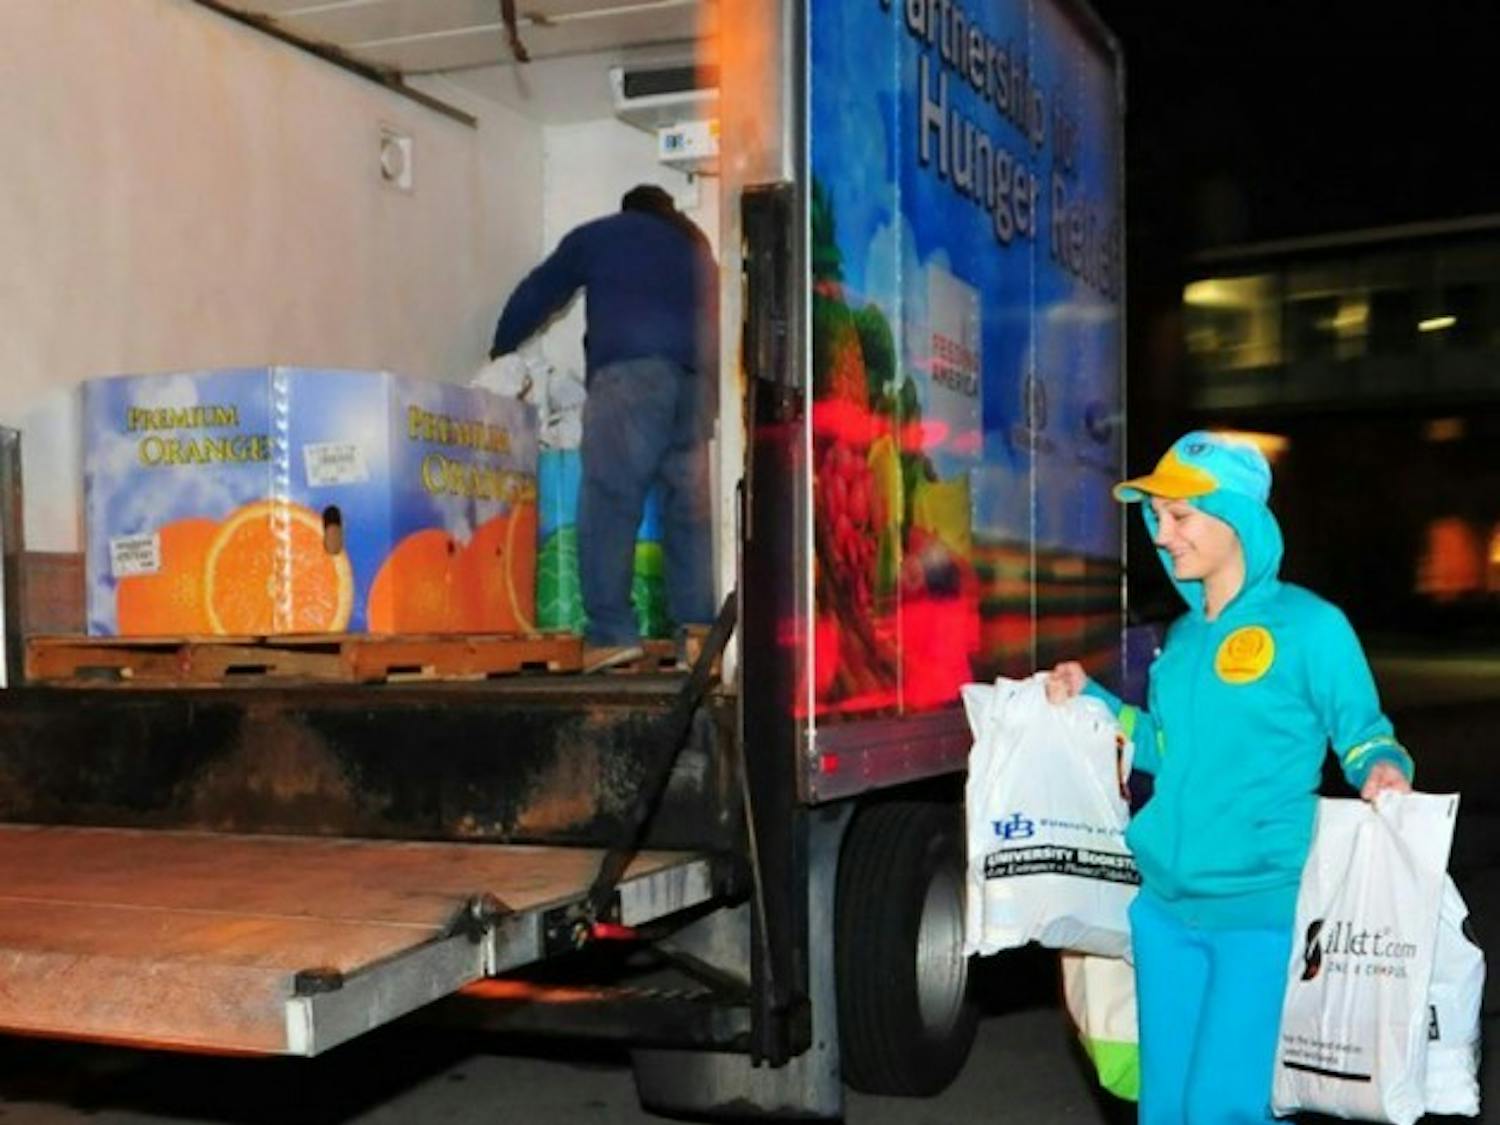 Students who participate in Trick or Eat go door-to-door collect non-perishable food items for food pantries in Western New York. Last year, students collected more than 1,400 pounds of food. &nbsp;Courtesy of Jennifer Jerussi